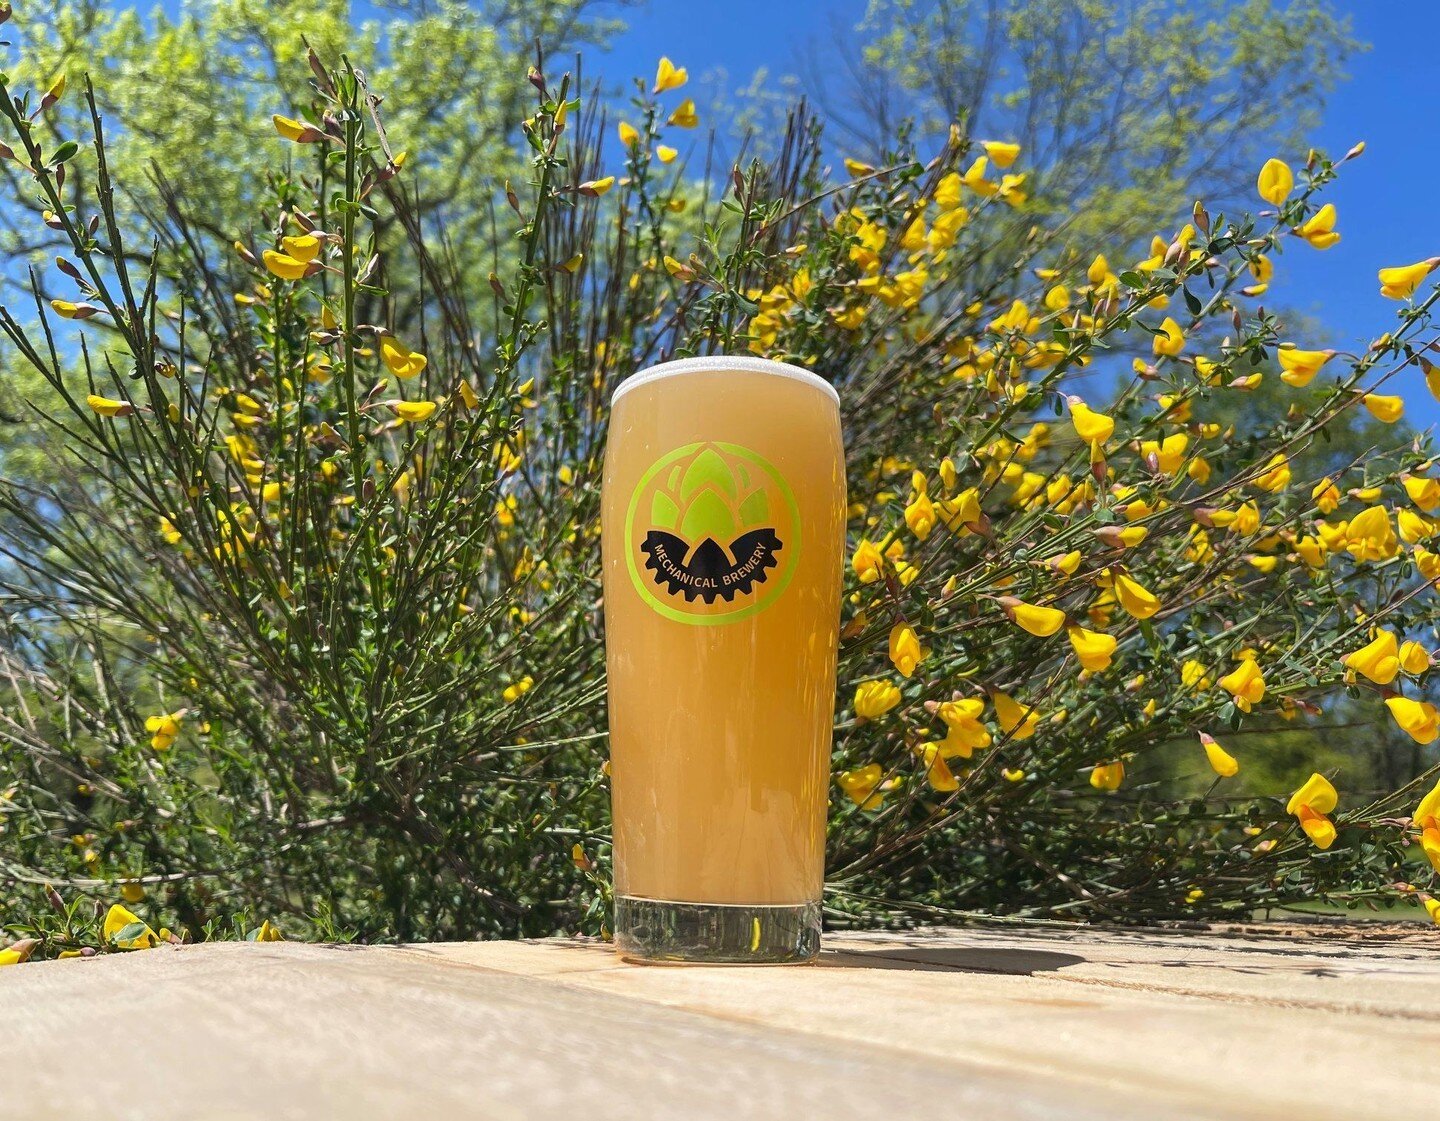 Happy Earth Day! No better way to celebrate Mother Earth than to spend the afternoon outdoors with a cold beer in hand. Stop up to Mechanical today and enjoy something delicious from 12-10pm.

#mechanicalbrewery #hazyipa #mechanicalbrewery #americanc